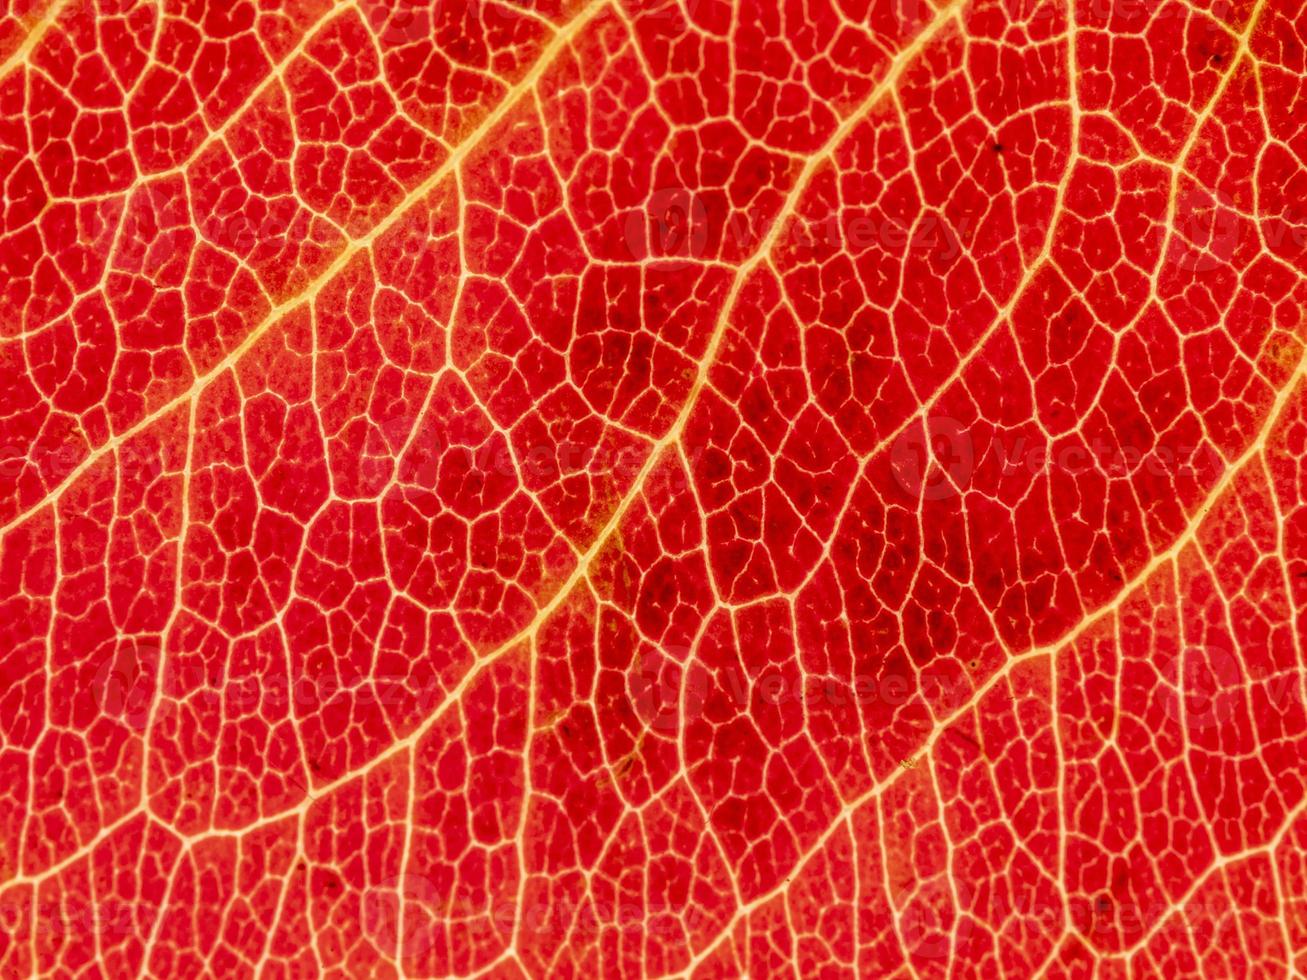 Underside of a translucent autumnal leaf in different shades. photo